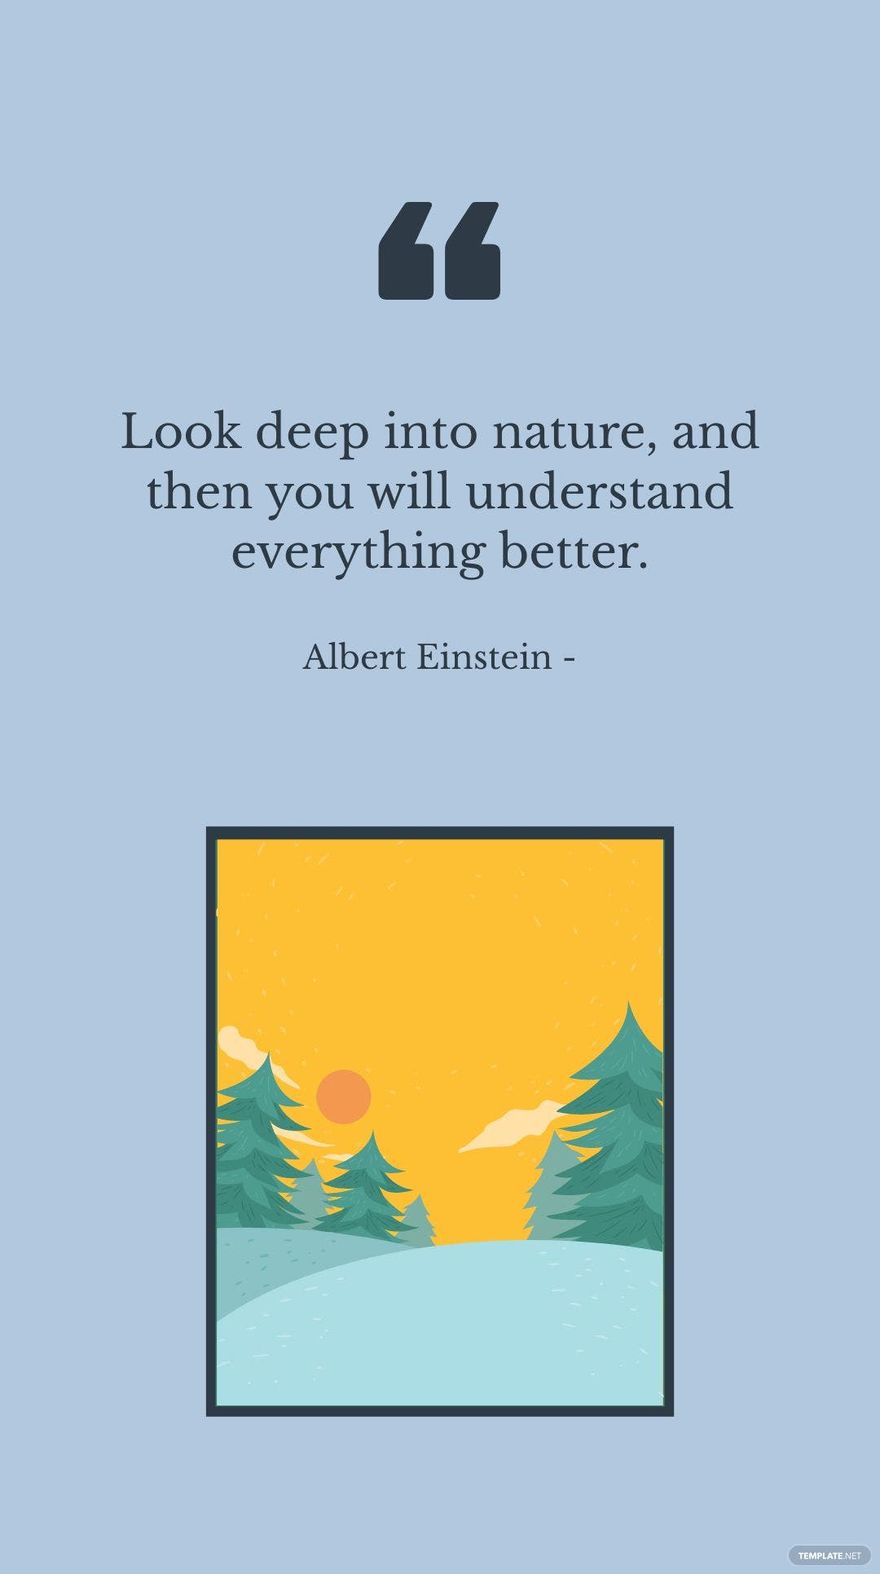 Free Albert Einstein - Look deep into nature, and then you will understand everything better. in JPG